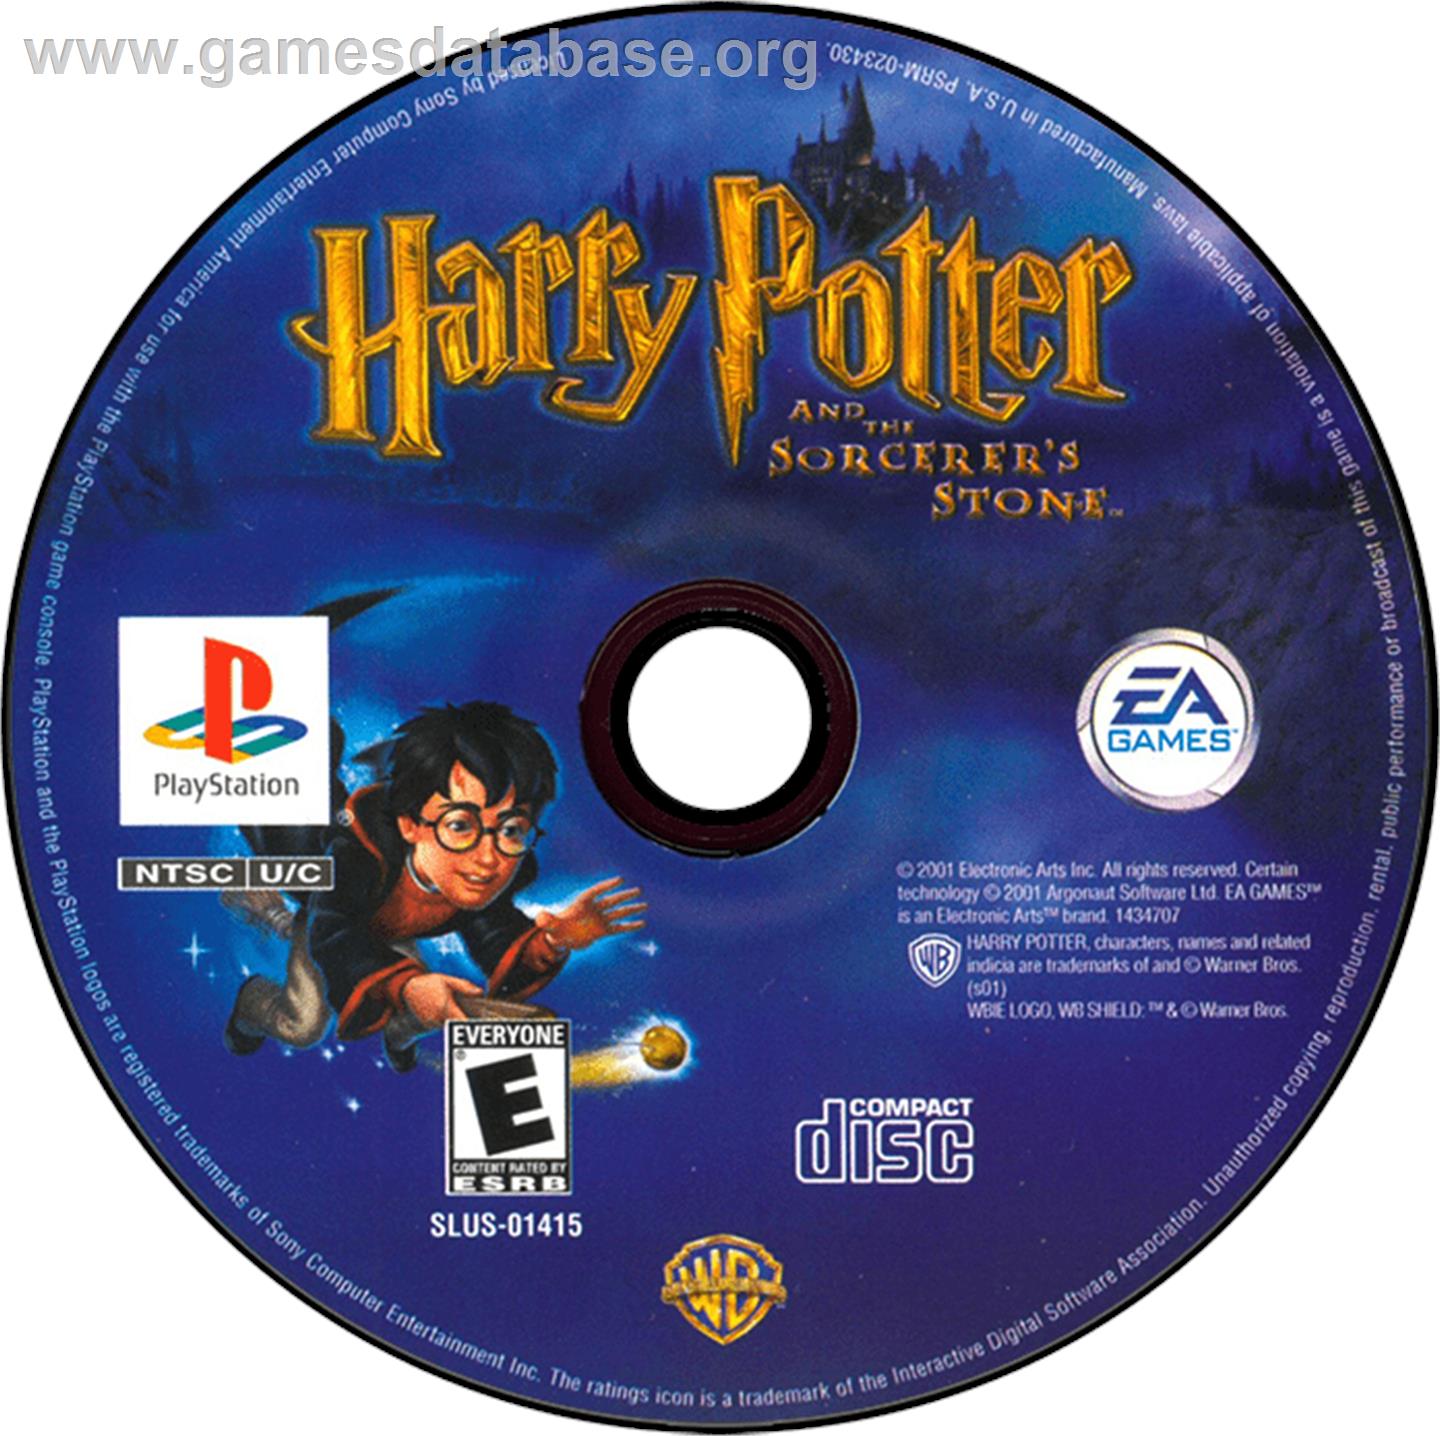 Harry Potter and the Sorcerer's Stone - Sony Playstation - Artwork - Disc